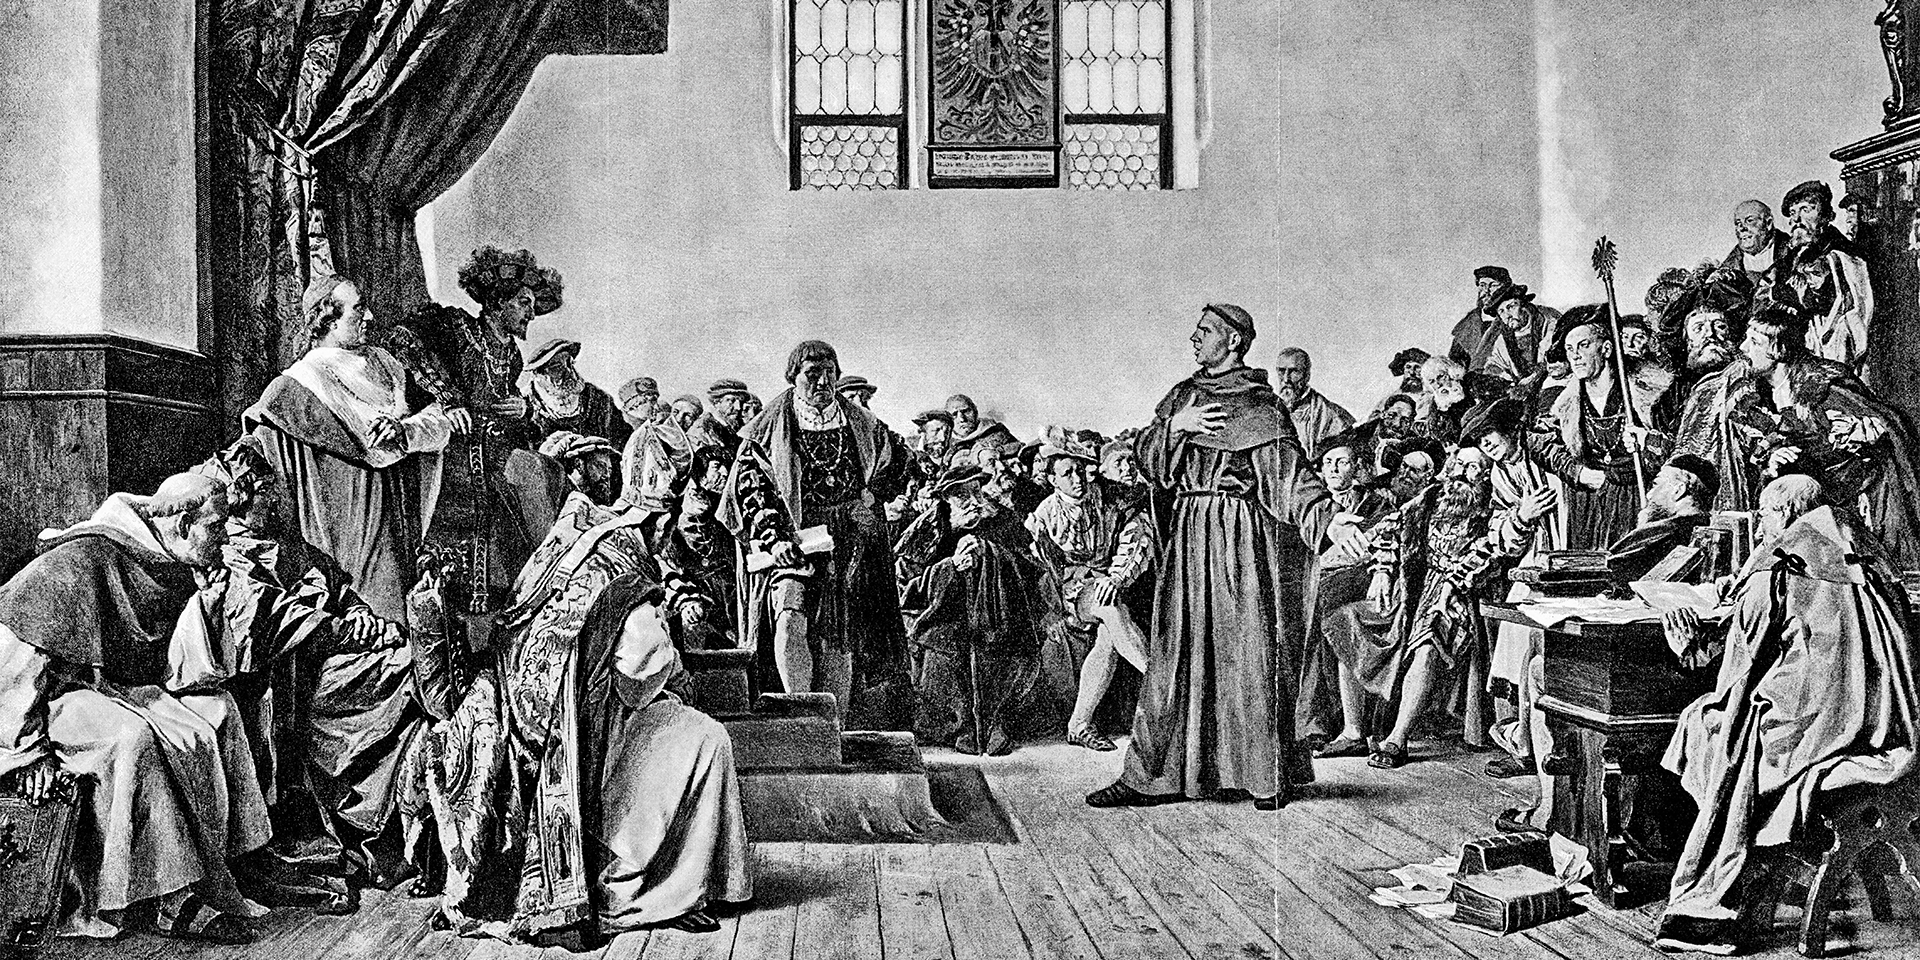 The Protestant Reformation: Between obstinacy and necessity